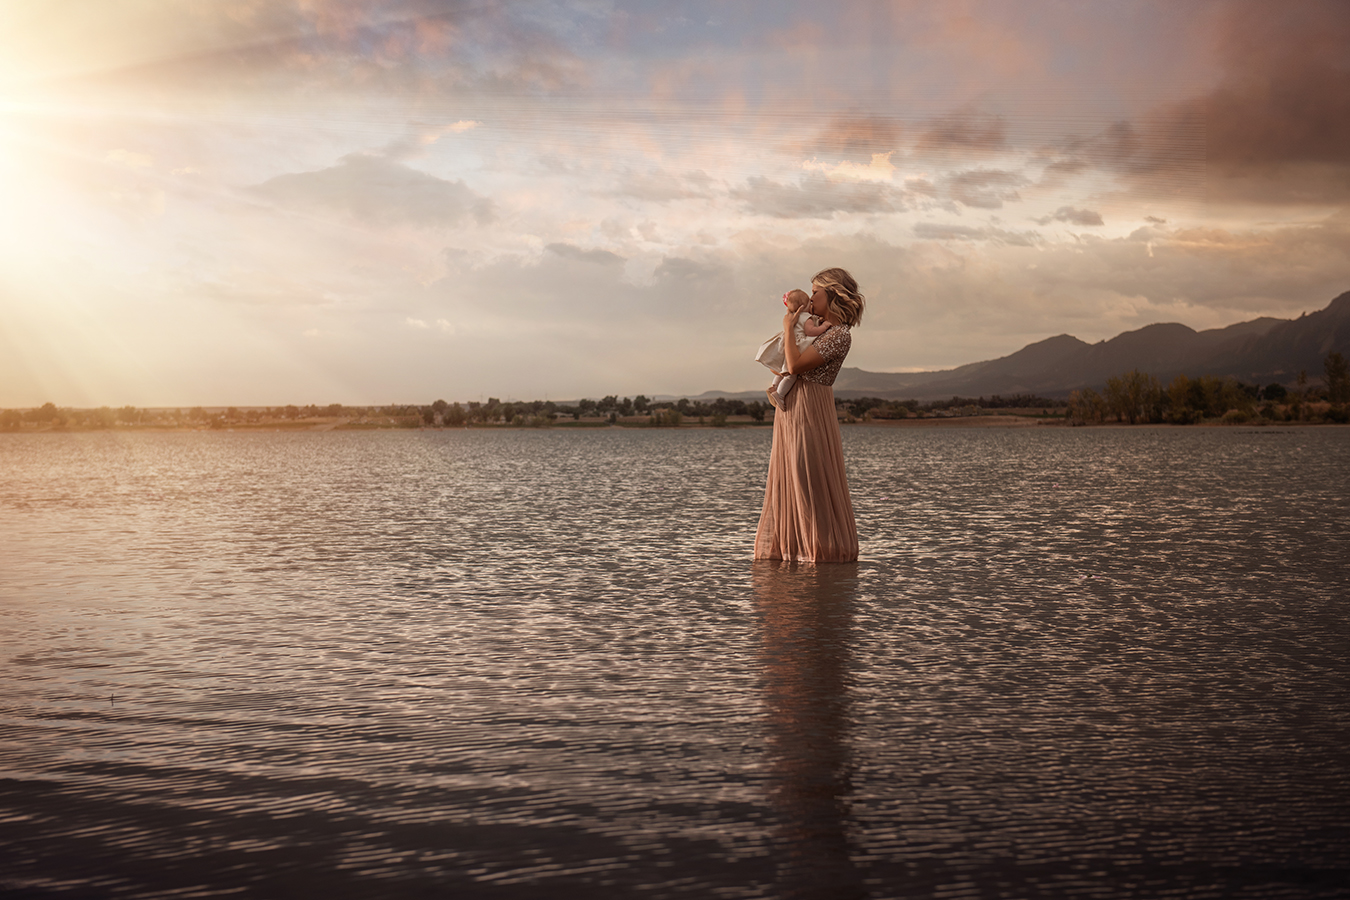 mother and baby in sparking gown in a lake at sunset - boulder photographer